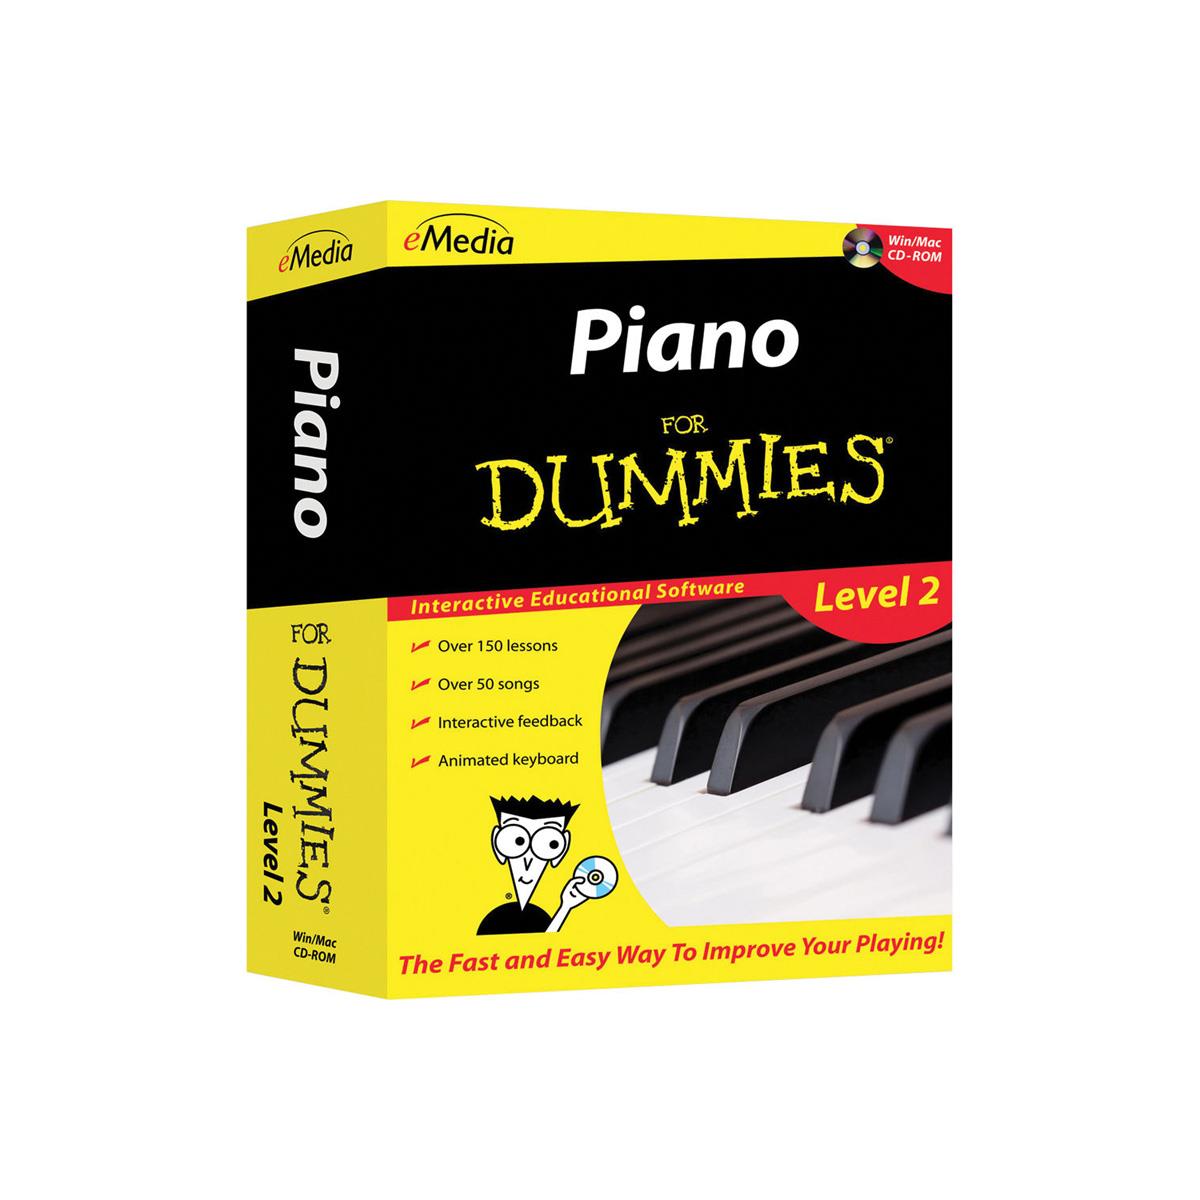 

eMedia Piano For Dummies Level 2 Software for Windows, Electronic Download